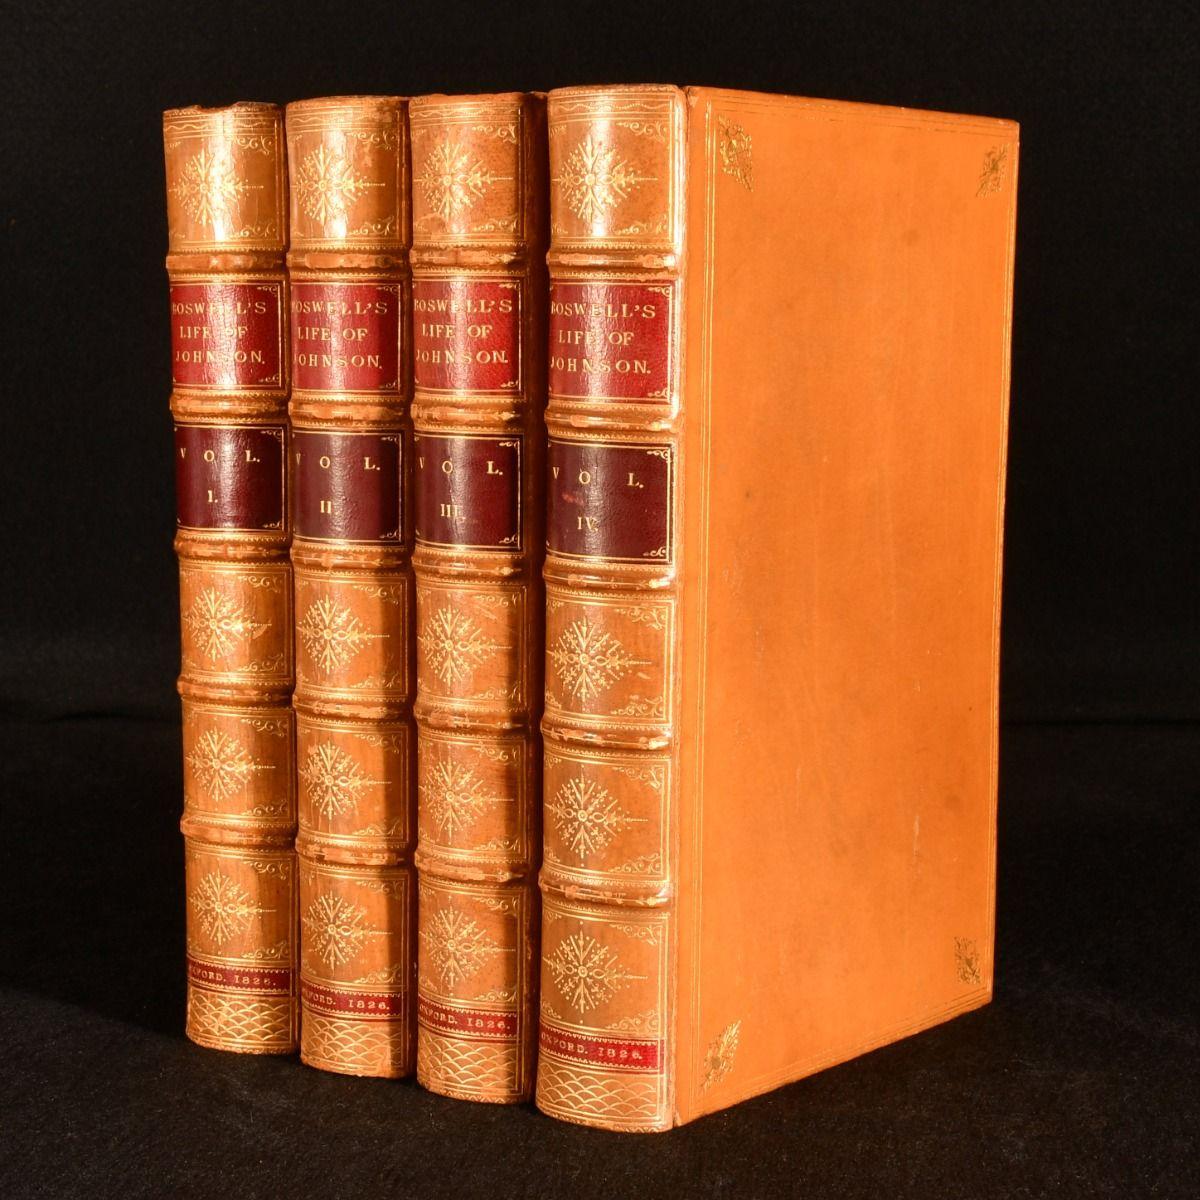 An exceptionally lovely extra-illustrated edition of Boswell's Life of Johnson, in full calf signed bindings by Tout.

An extra illustrated four volume edition of this landmark work in the development of the modern biography in English. Many have